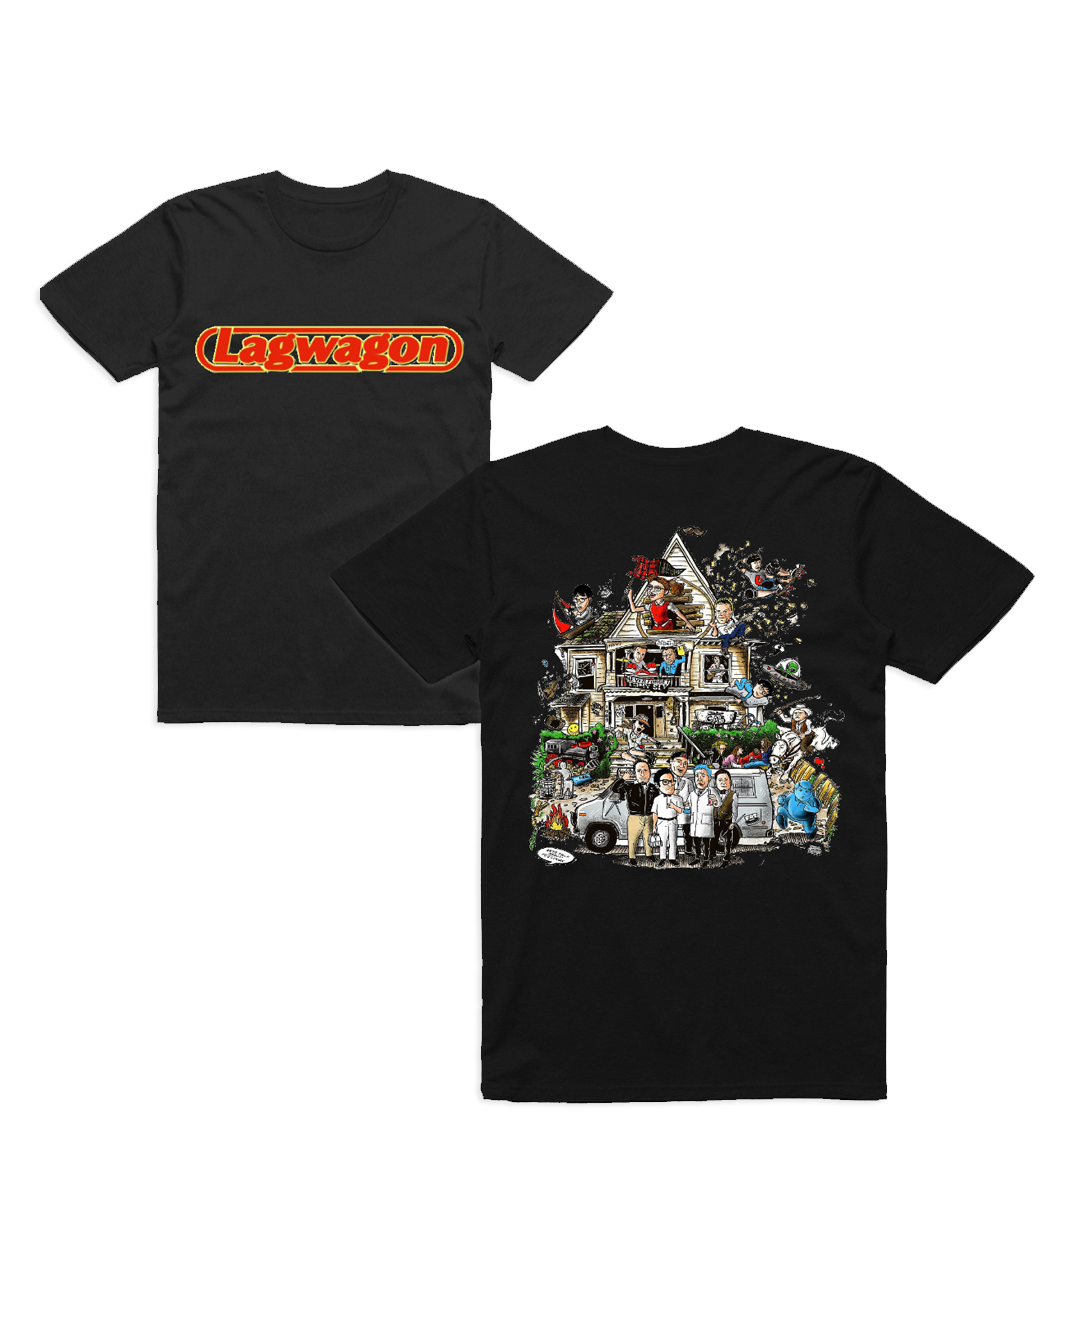 30 Years On The Wagon T-Shirt